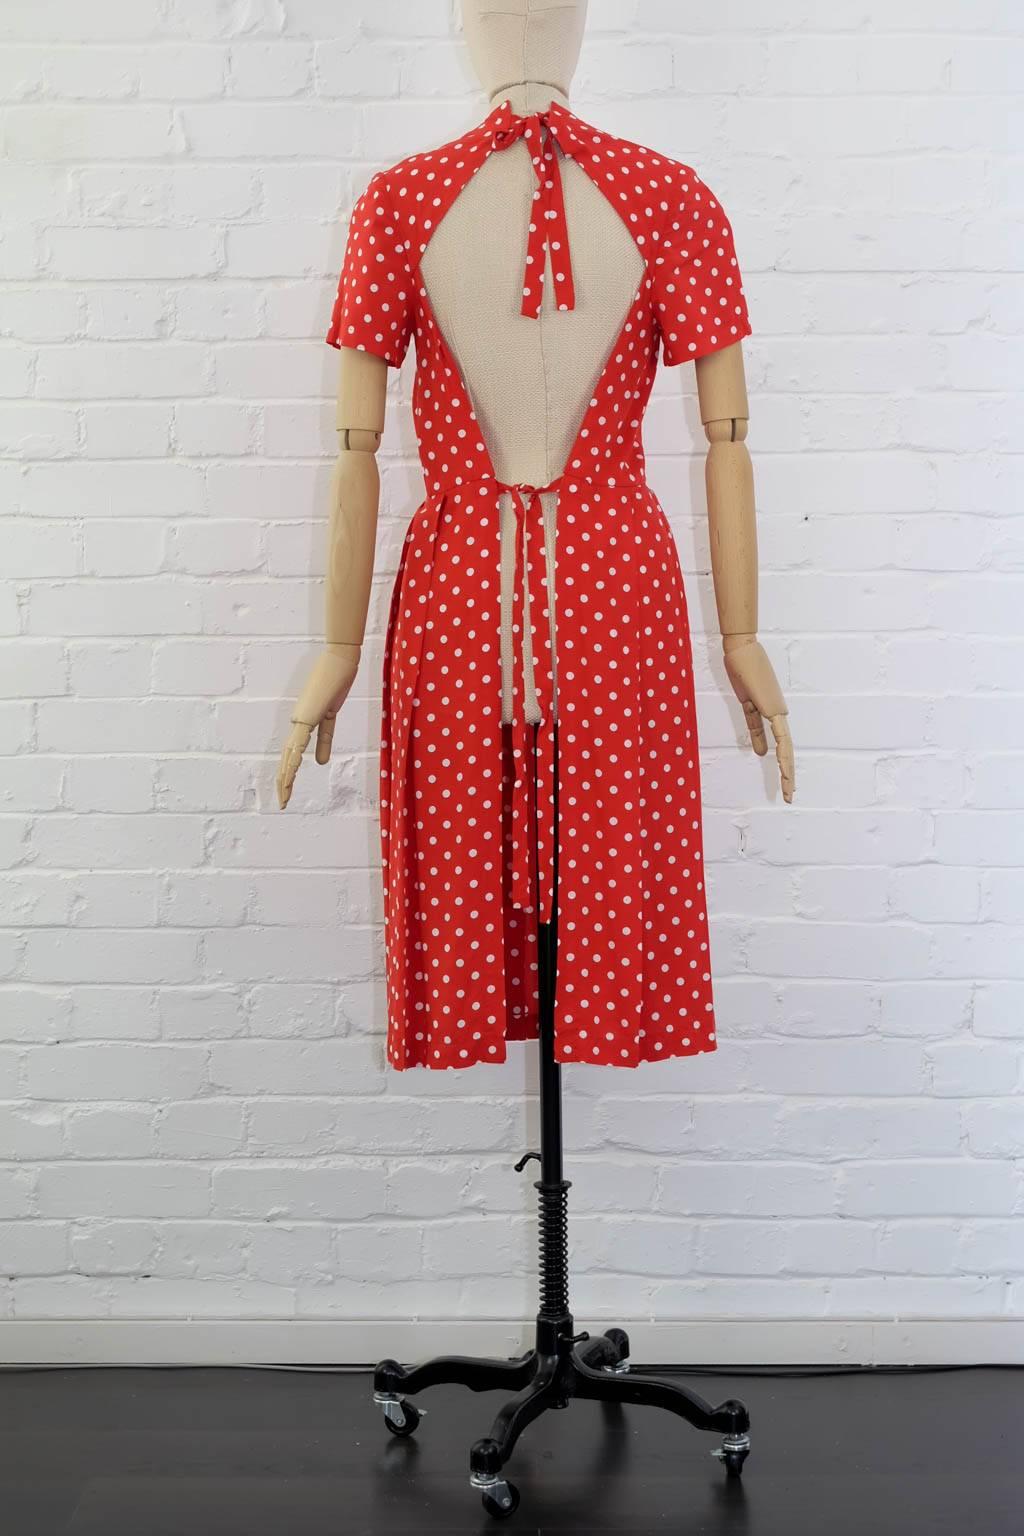 2014 Comme des Garcons polka dot red apron dress featuring short sleeves, open back and a pleated skirt.

Size S
adjustable waist. minimum 64cm
front bust 46cm
sleeve 20cm
shoulder to shoulder 36cm
length 106cm

100% rayon